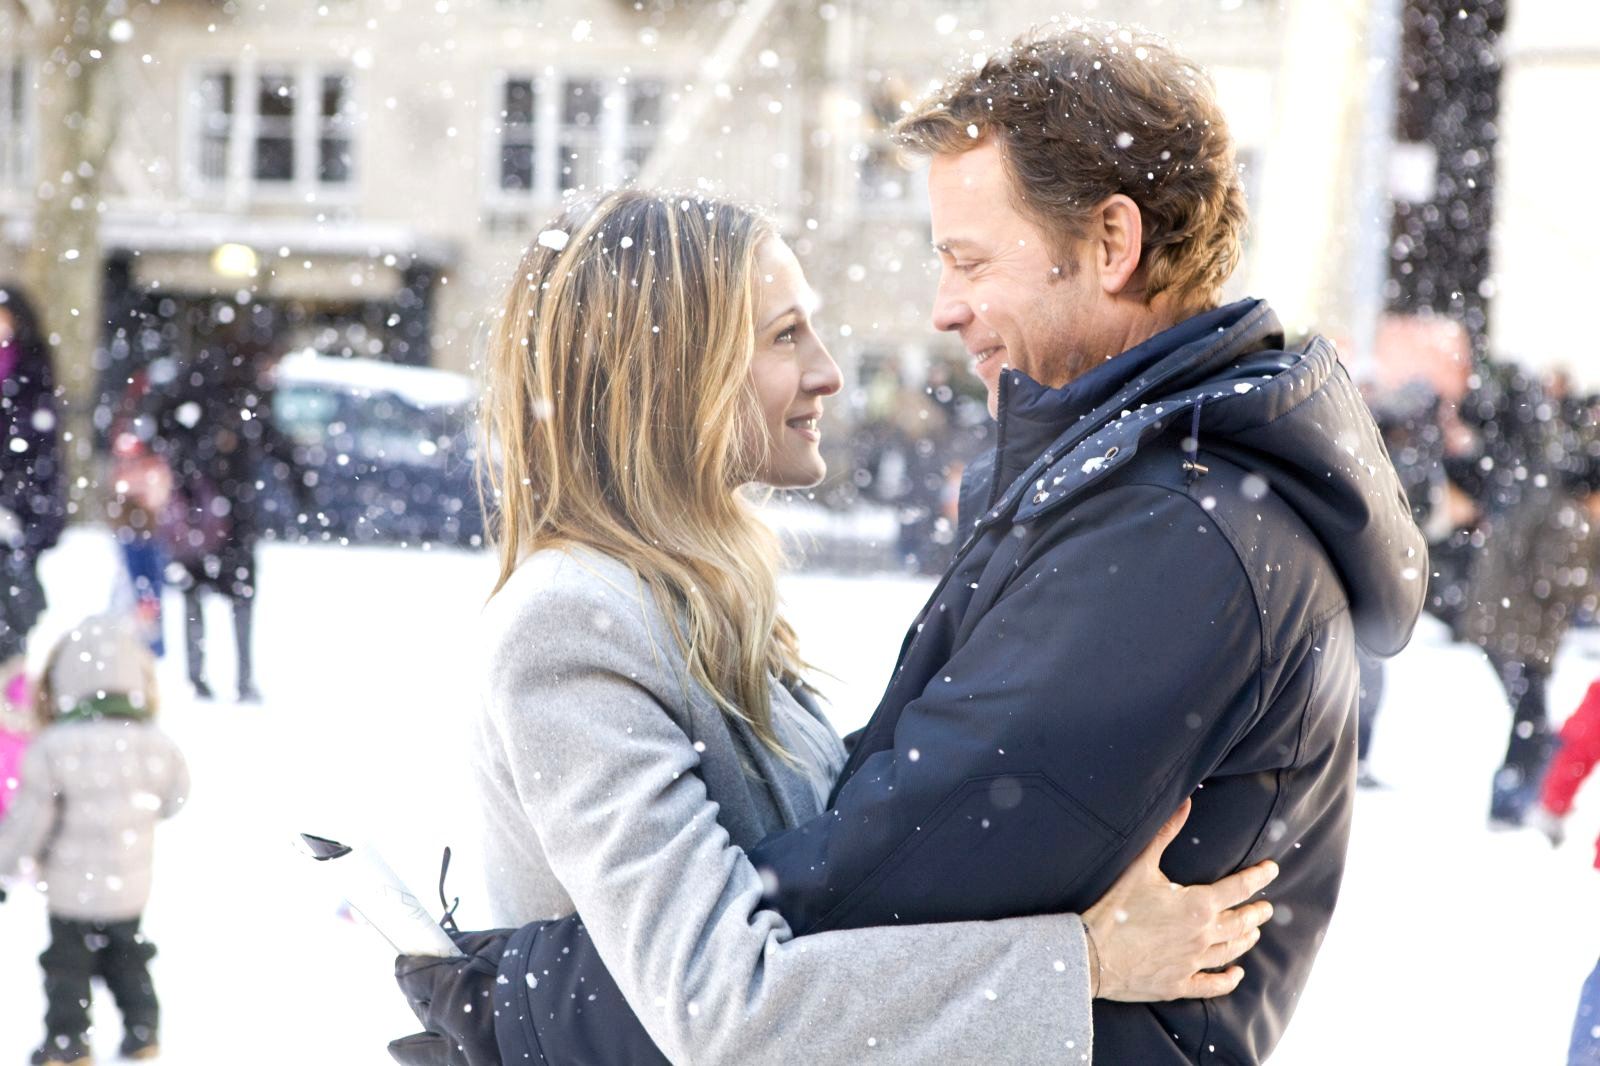 Sarah Jessica Parker stars as Kate Reddy and Greg Kinnear stars as Richard Reddy in The Weinstein Company's I Don't Know How She Does It (2011). Photo credit by Craig Blankenhorn.